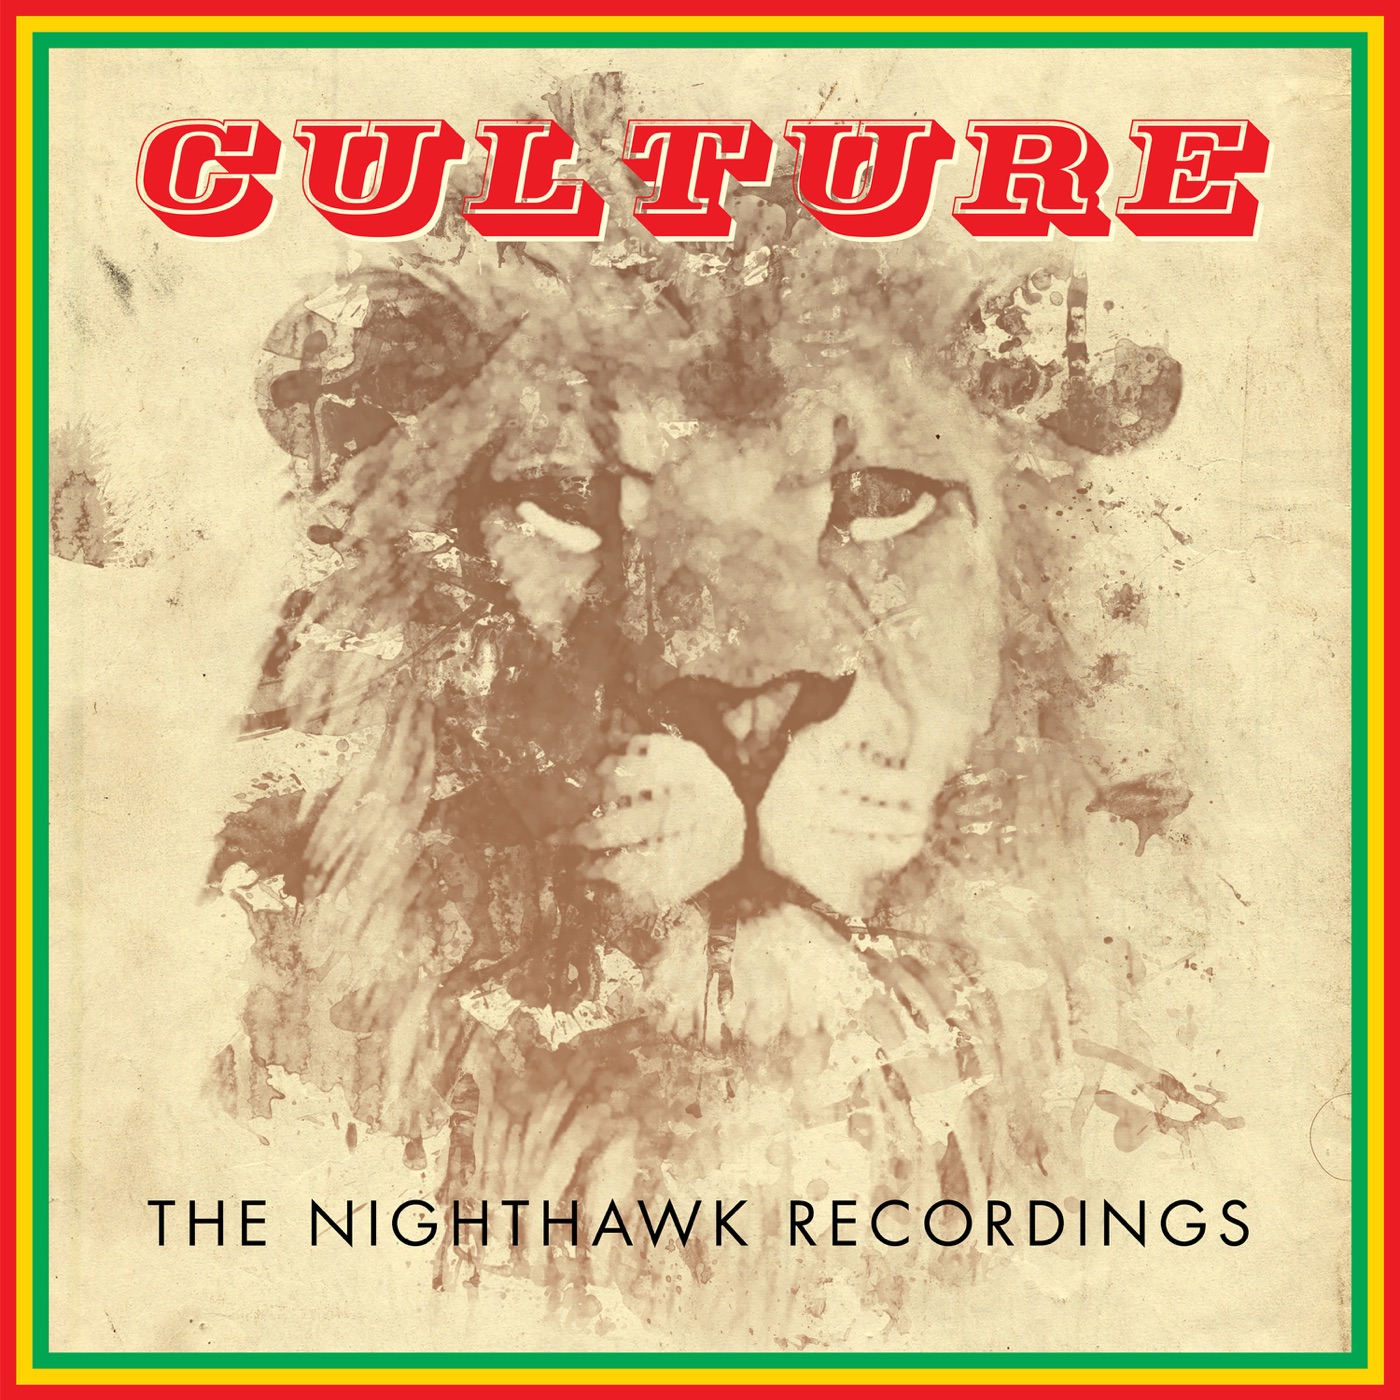 The Nighthawk Recordings by Culture